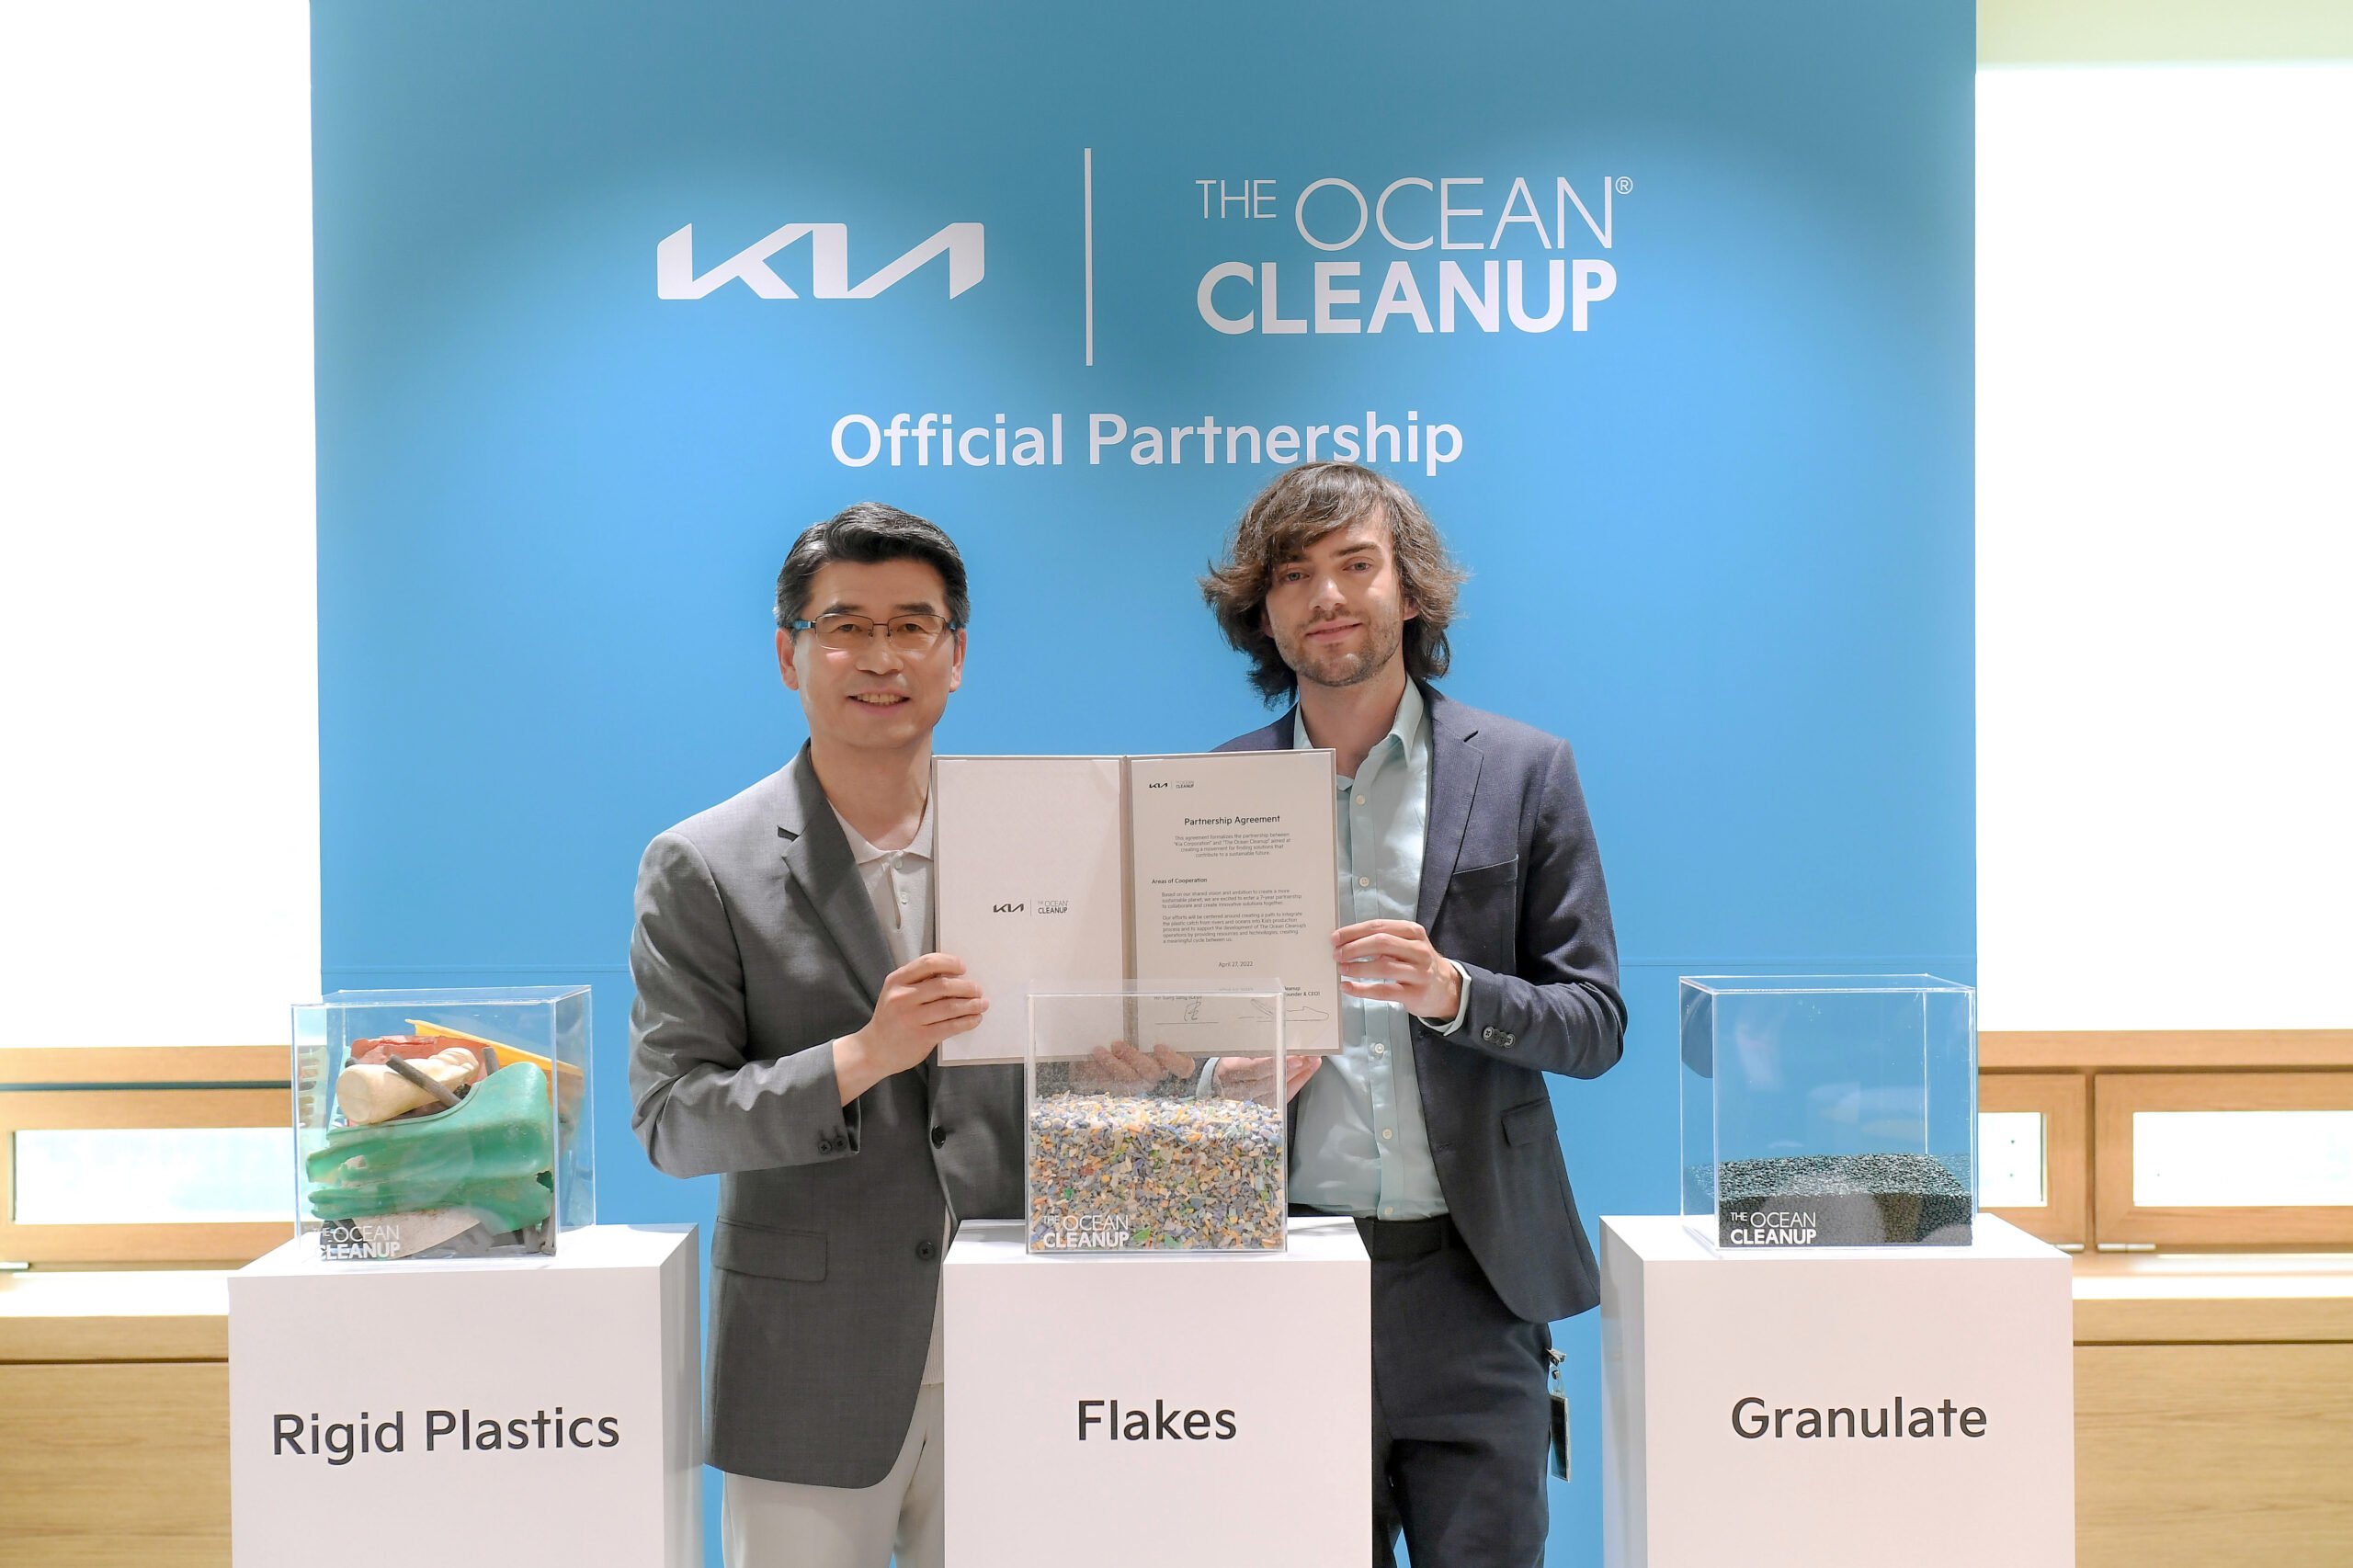 Kia partners with The Ocean Cleanup to be a "Sustainable Mobility Solutions Provider’